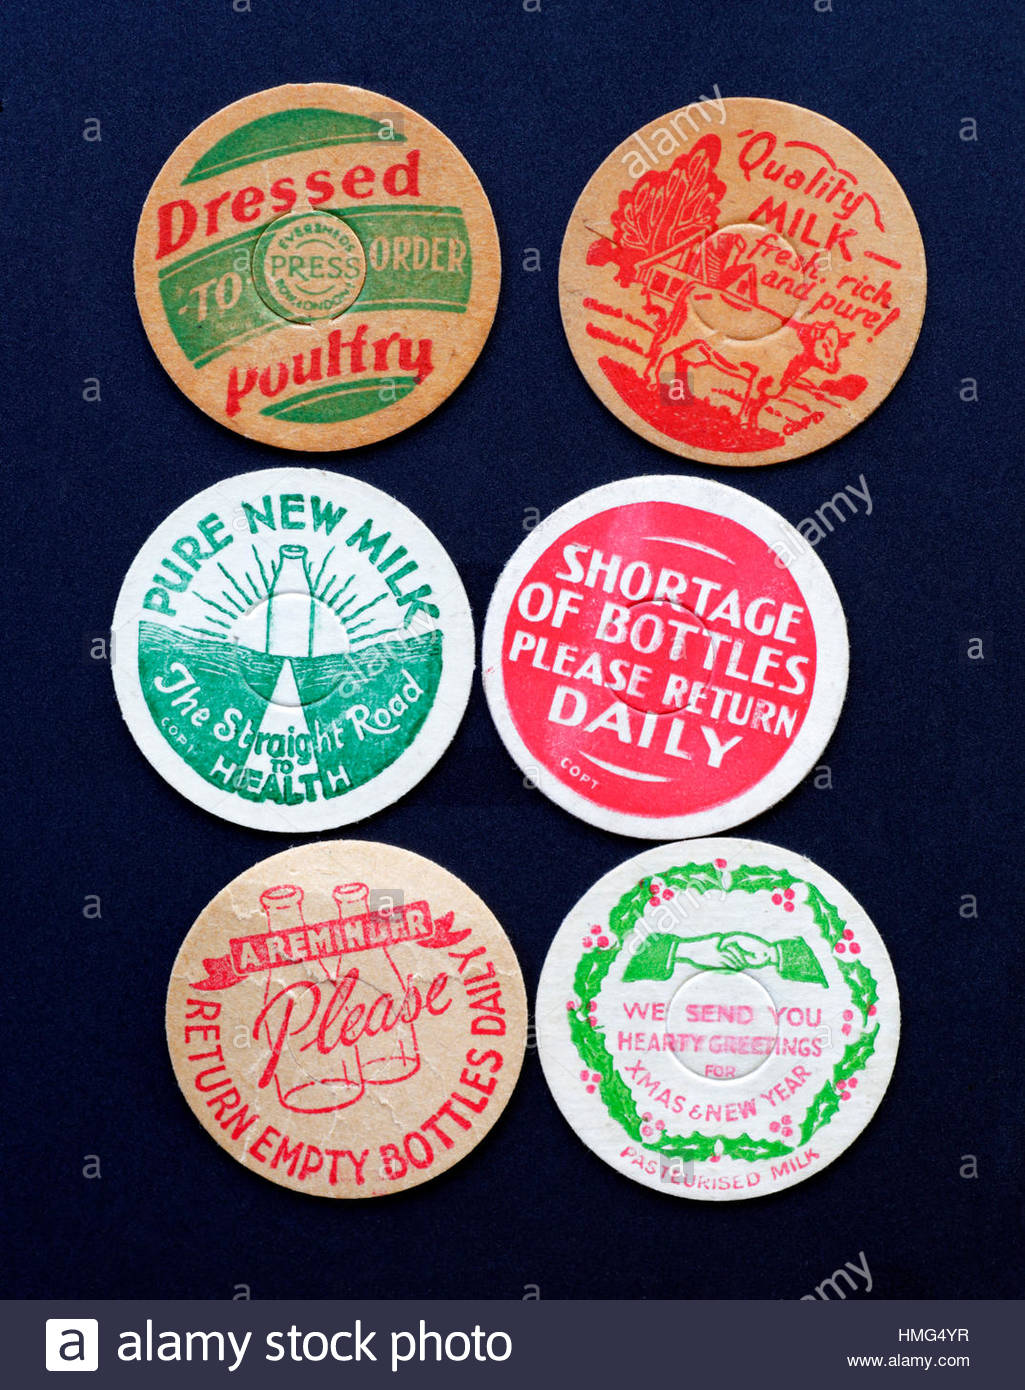 Old Milk bottle card caps from the 1940s Stock Photo